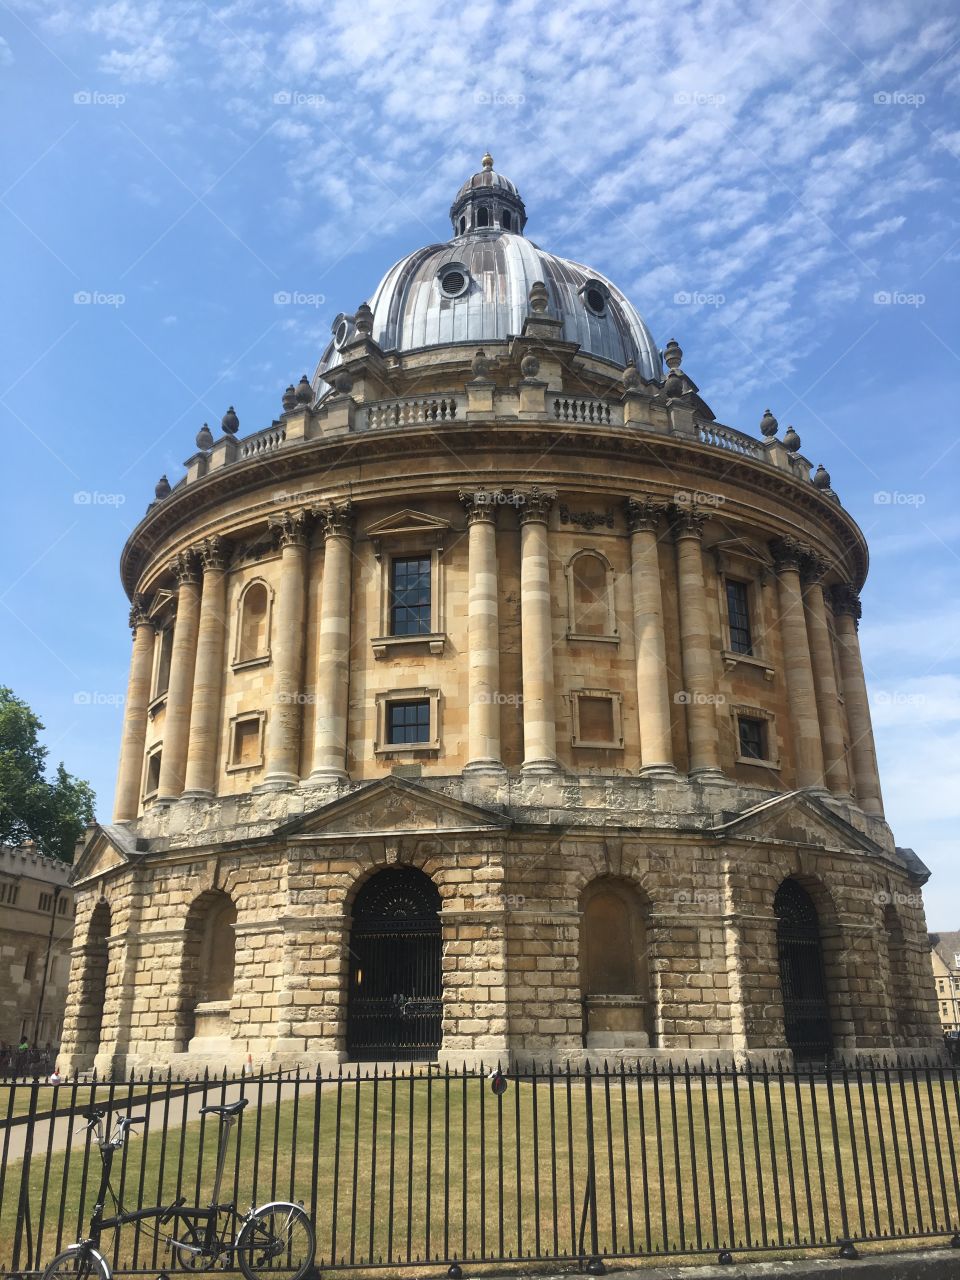 History and Wisdom at the Radcliffe Camera in Oxford, UK